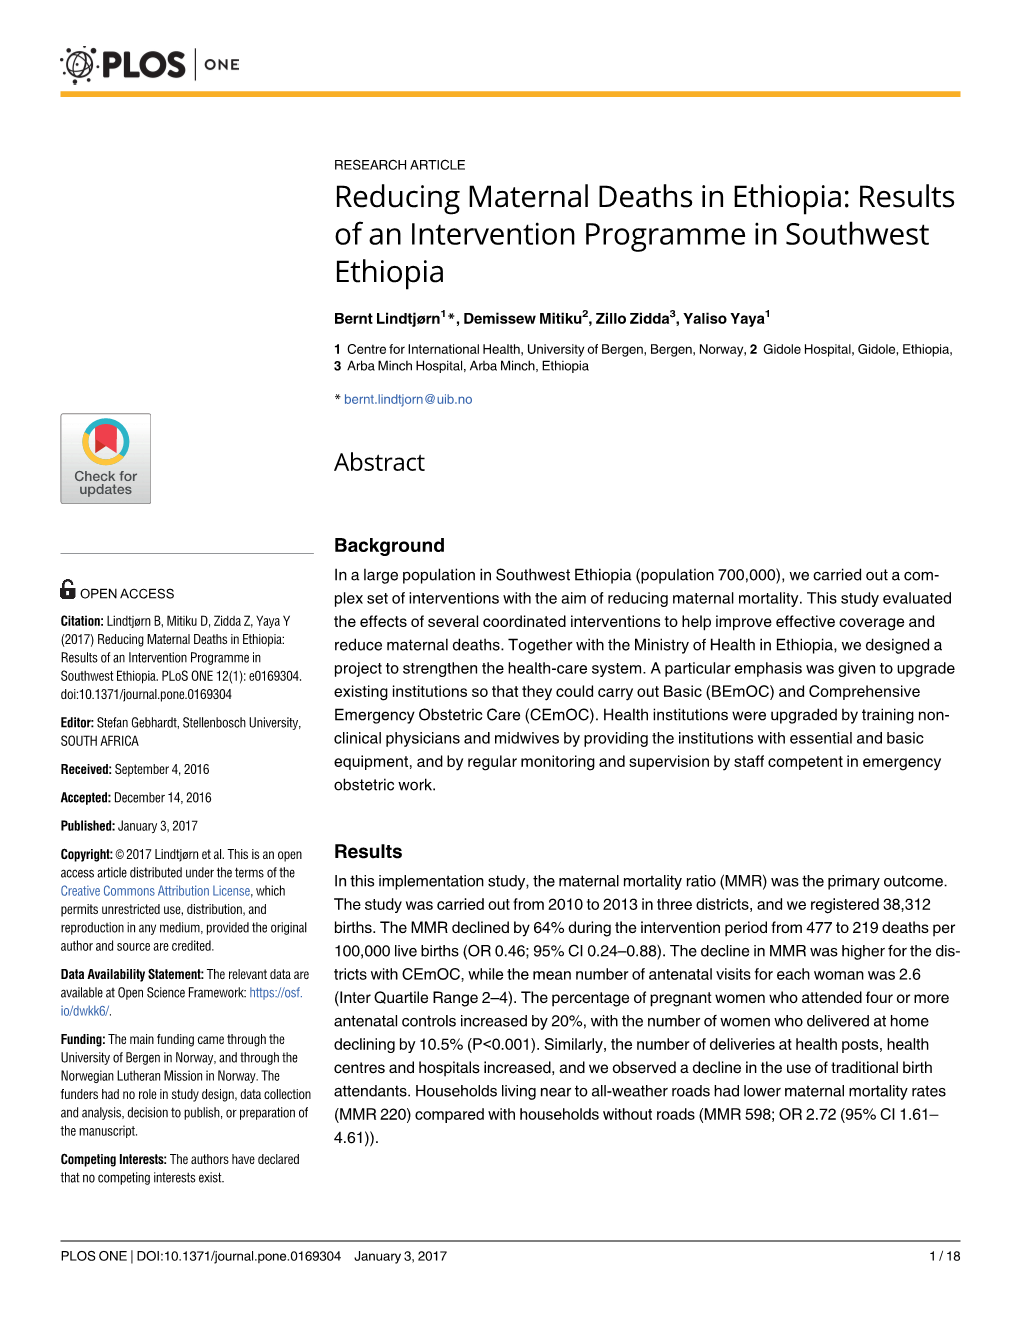 Reducing Maternal Deaths in Ethiopia: Results of an Intervention Programme in Southwest Ethiopia